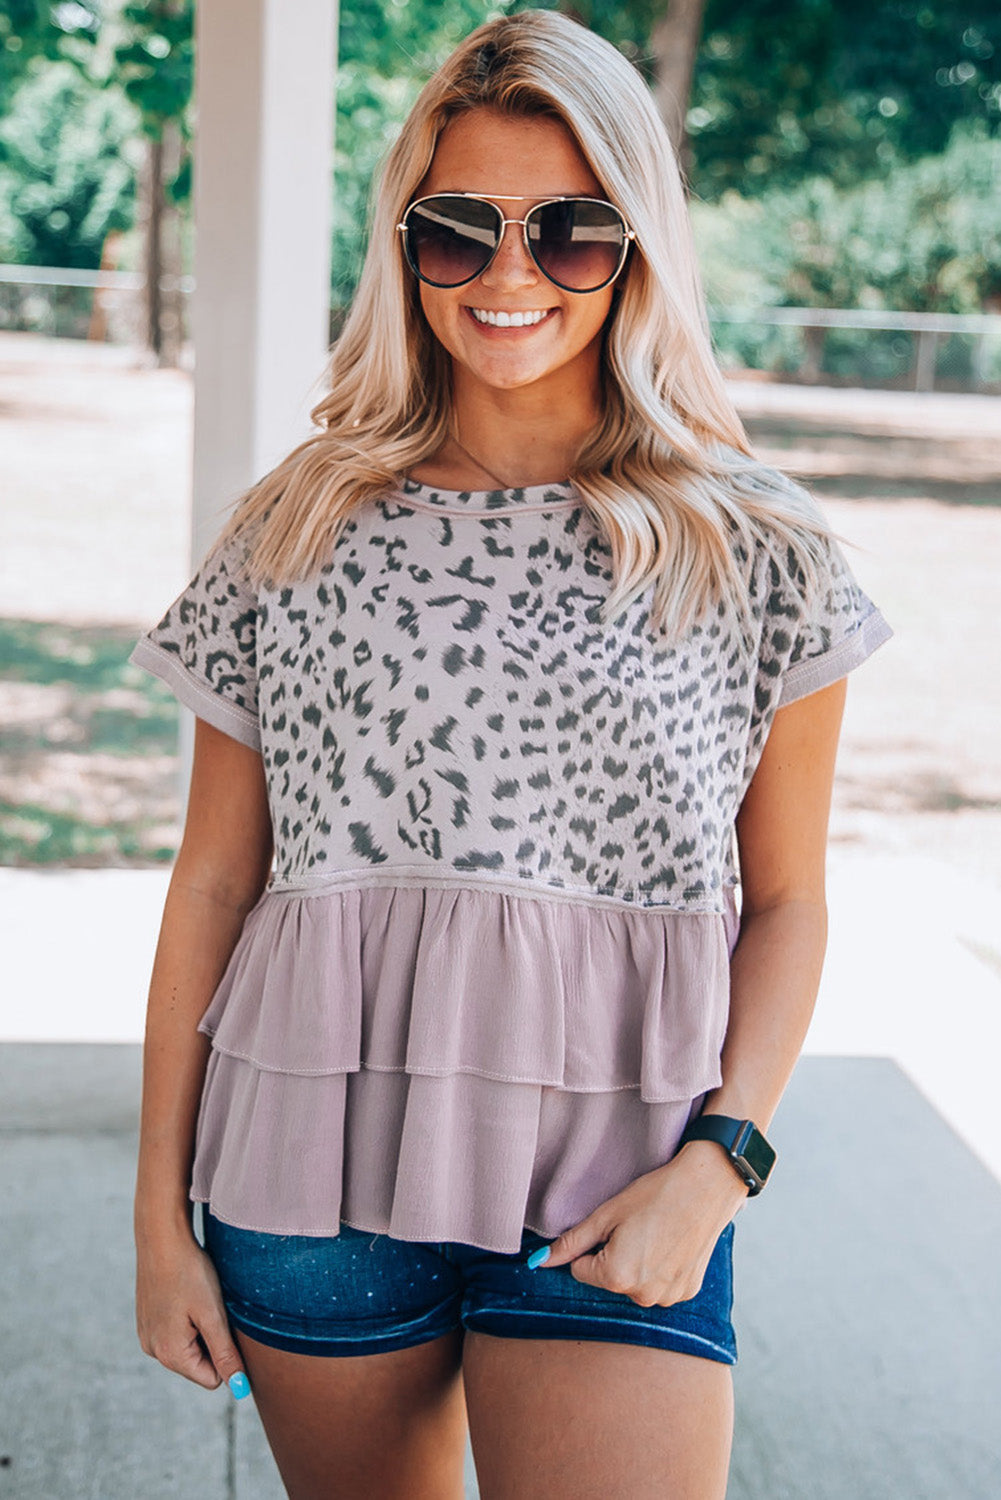 Pink Leopard Tiered Ruffle Short Sleeve Top